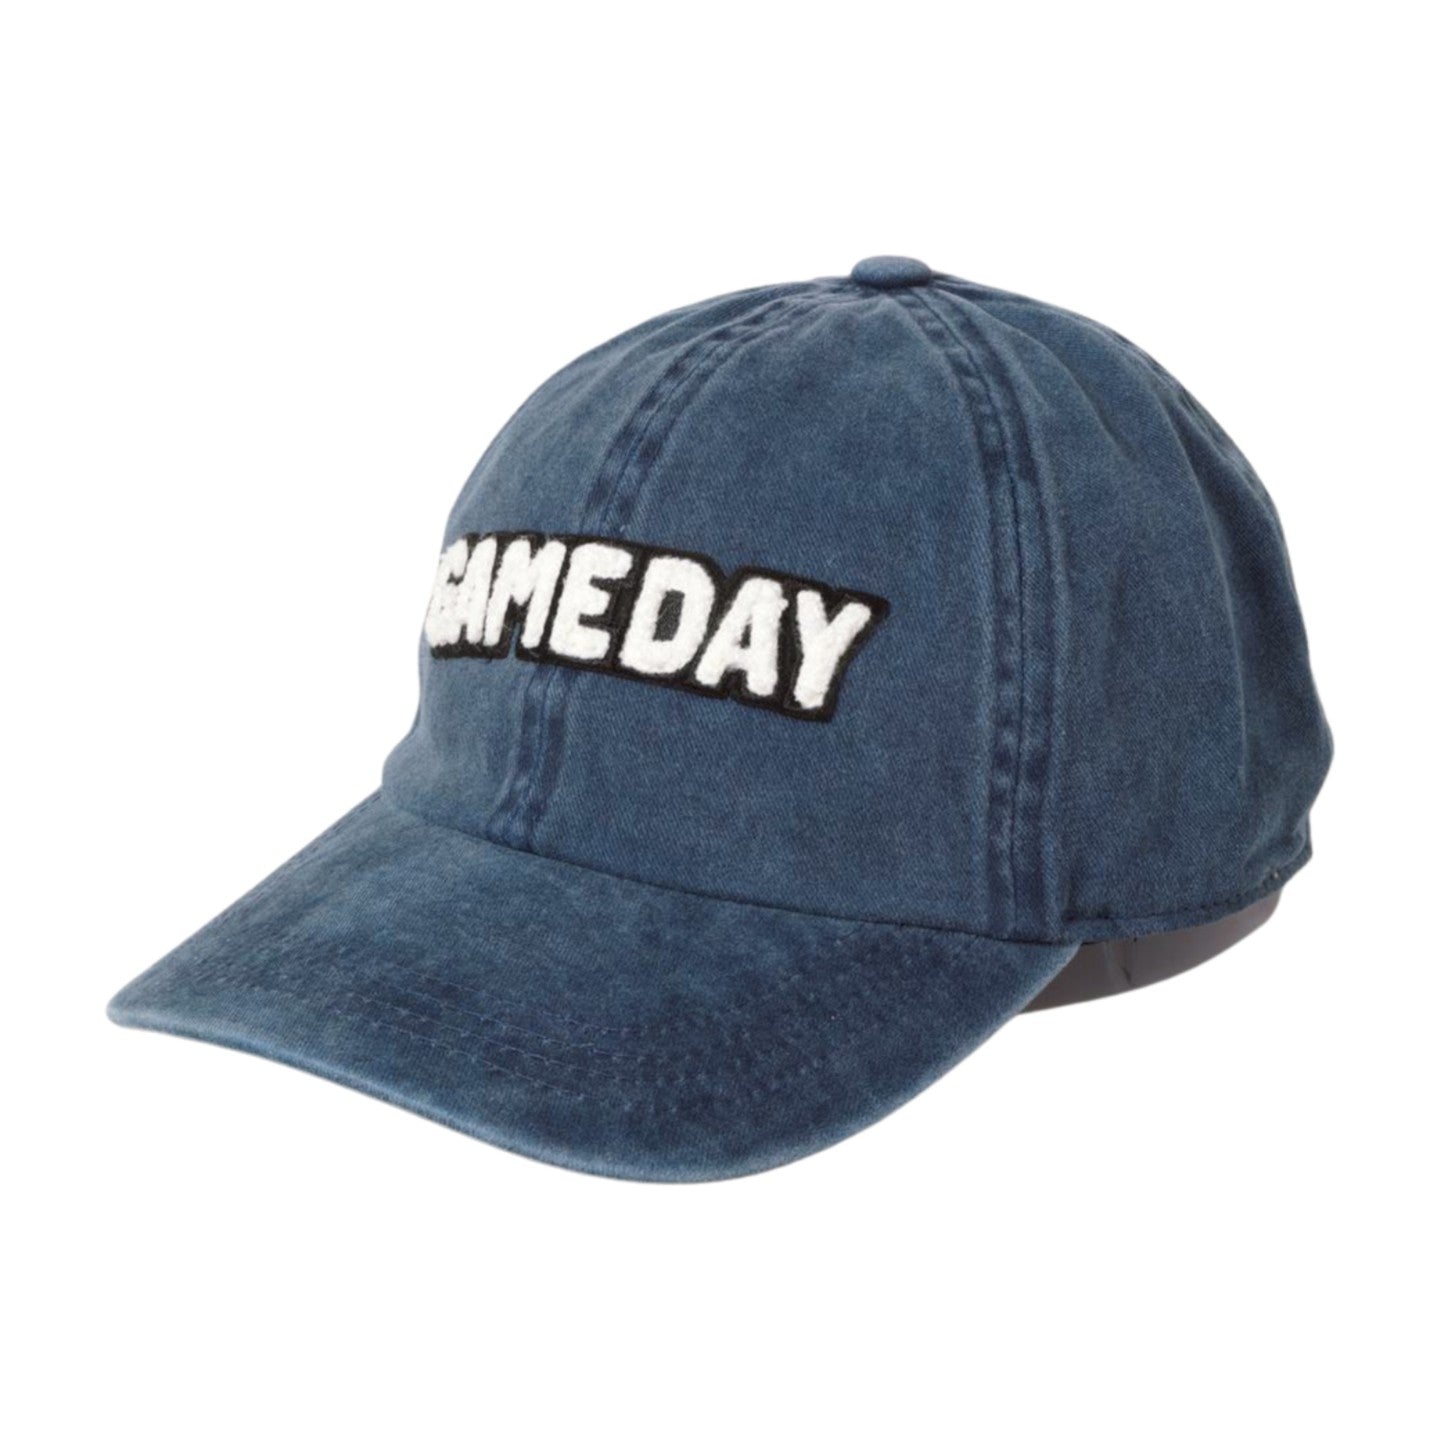 GAME DAY Chenille Patch Buckle adjustable hat